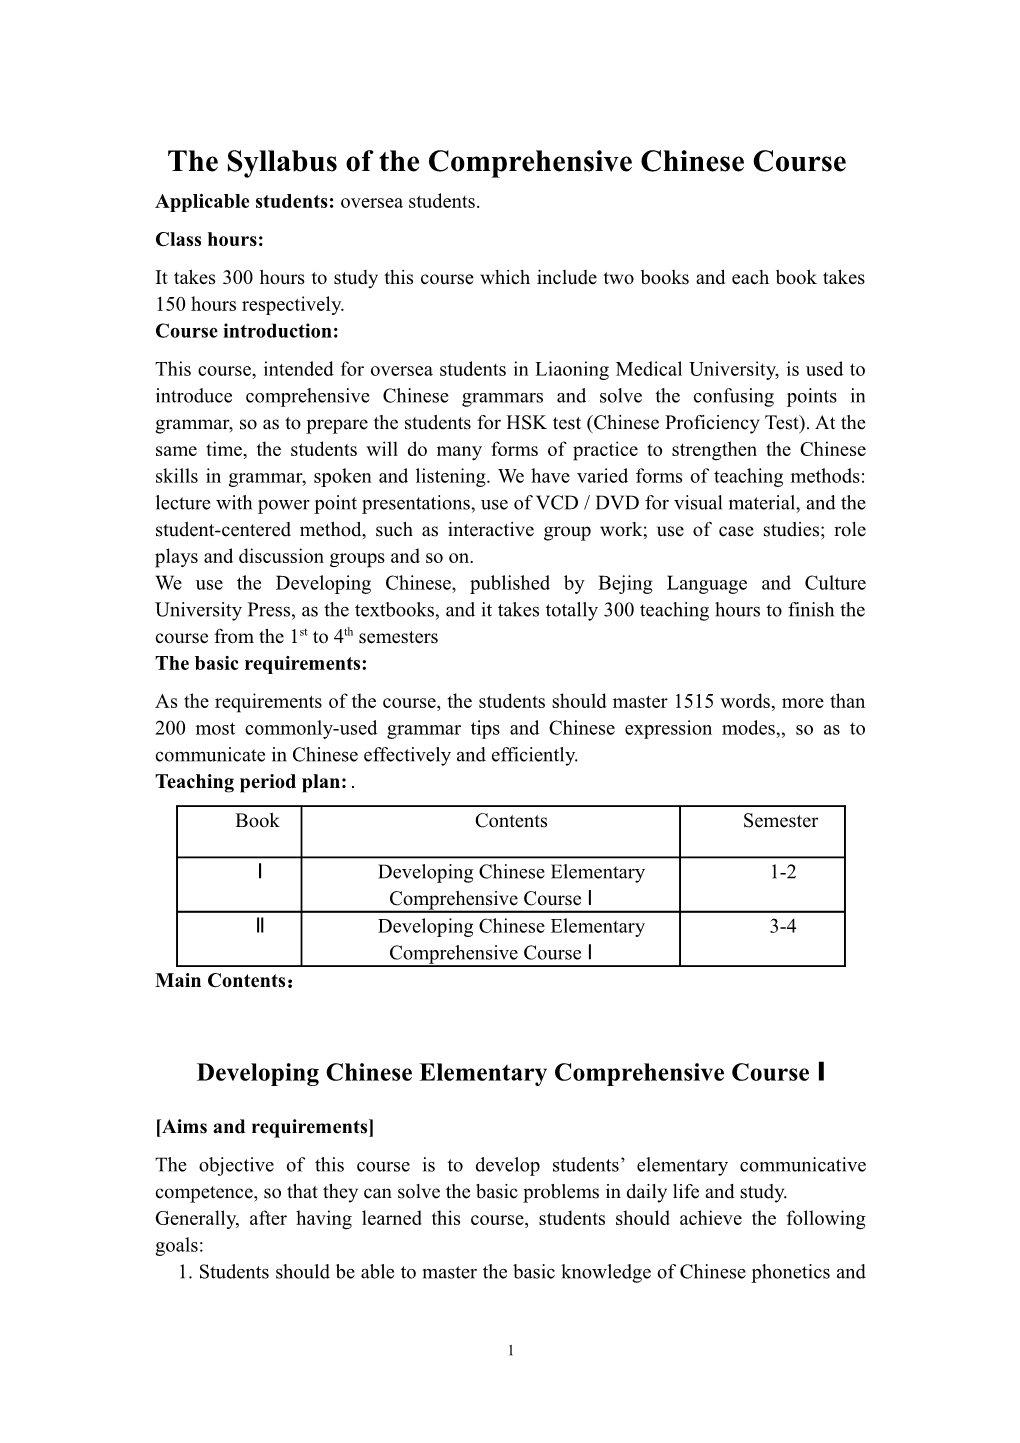 The Syllabus of the Comprehensive Chinesecourse